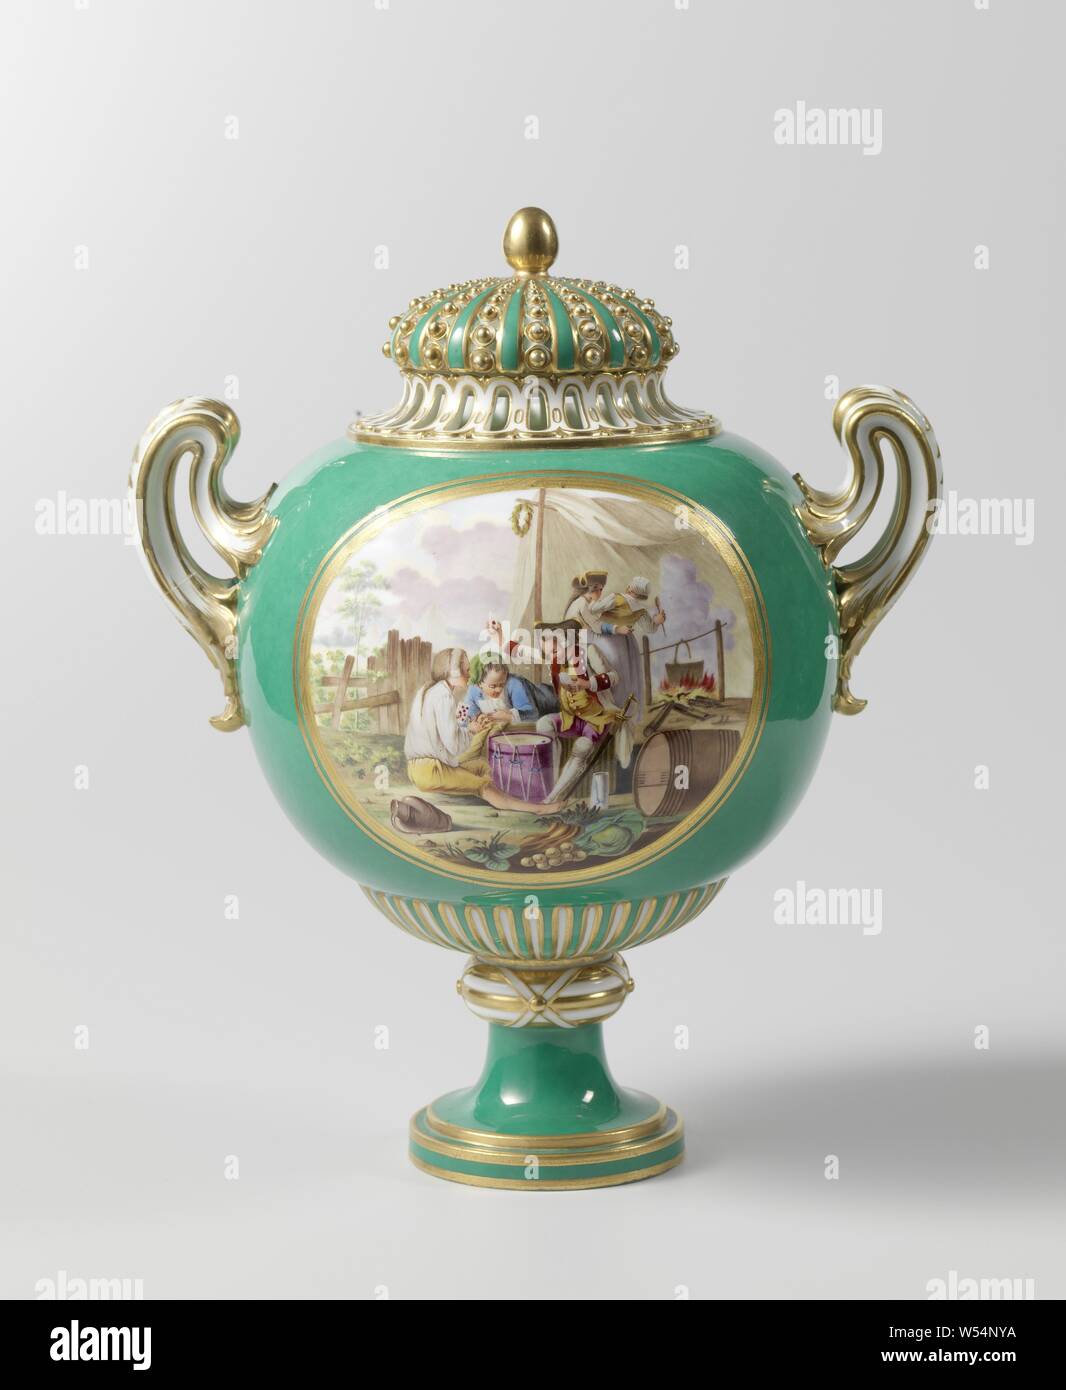 Vase (vase balloon), Vase with lid (vase balloon), Spherical vase of  multicolored painted porcelain, with a green background The vase stands on  one foot, has two curved, volute-shaped ears and a lid.